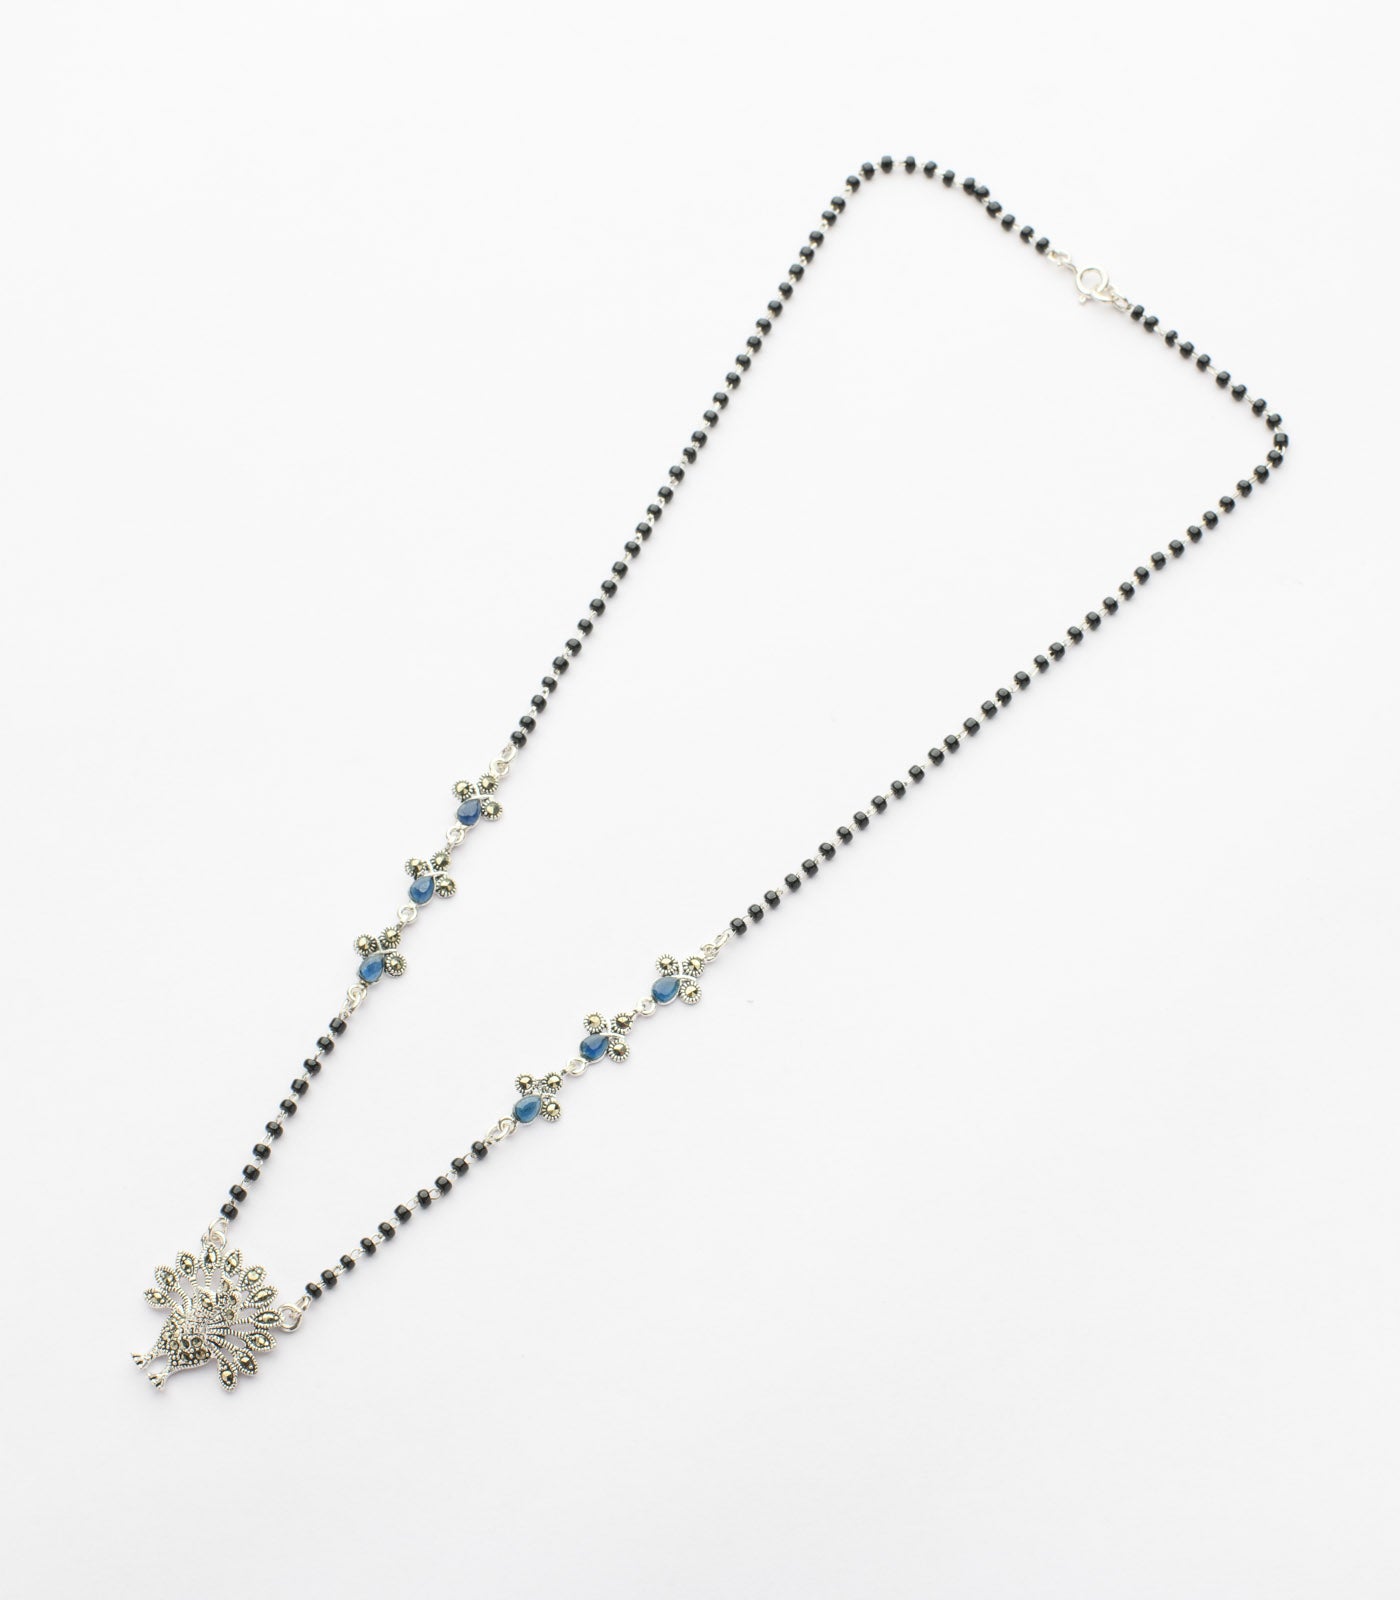 Peacock Mangalsutra (Silver)